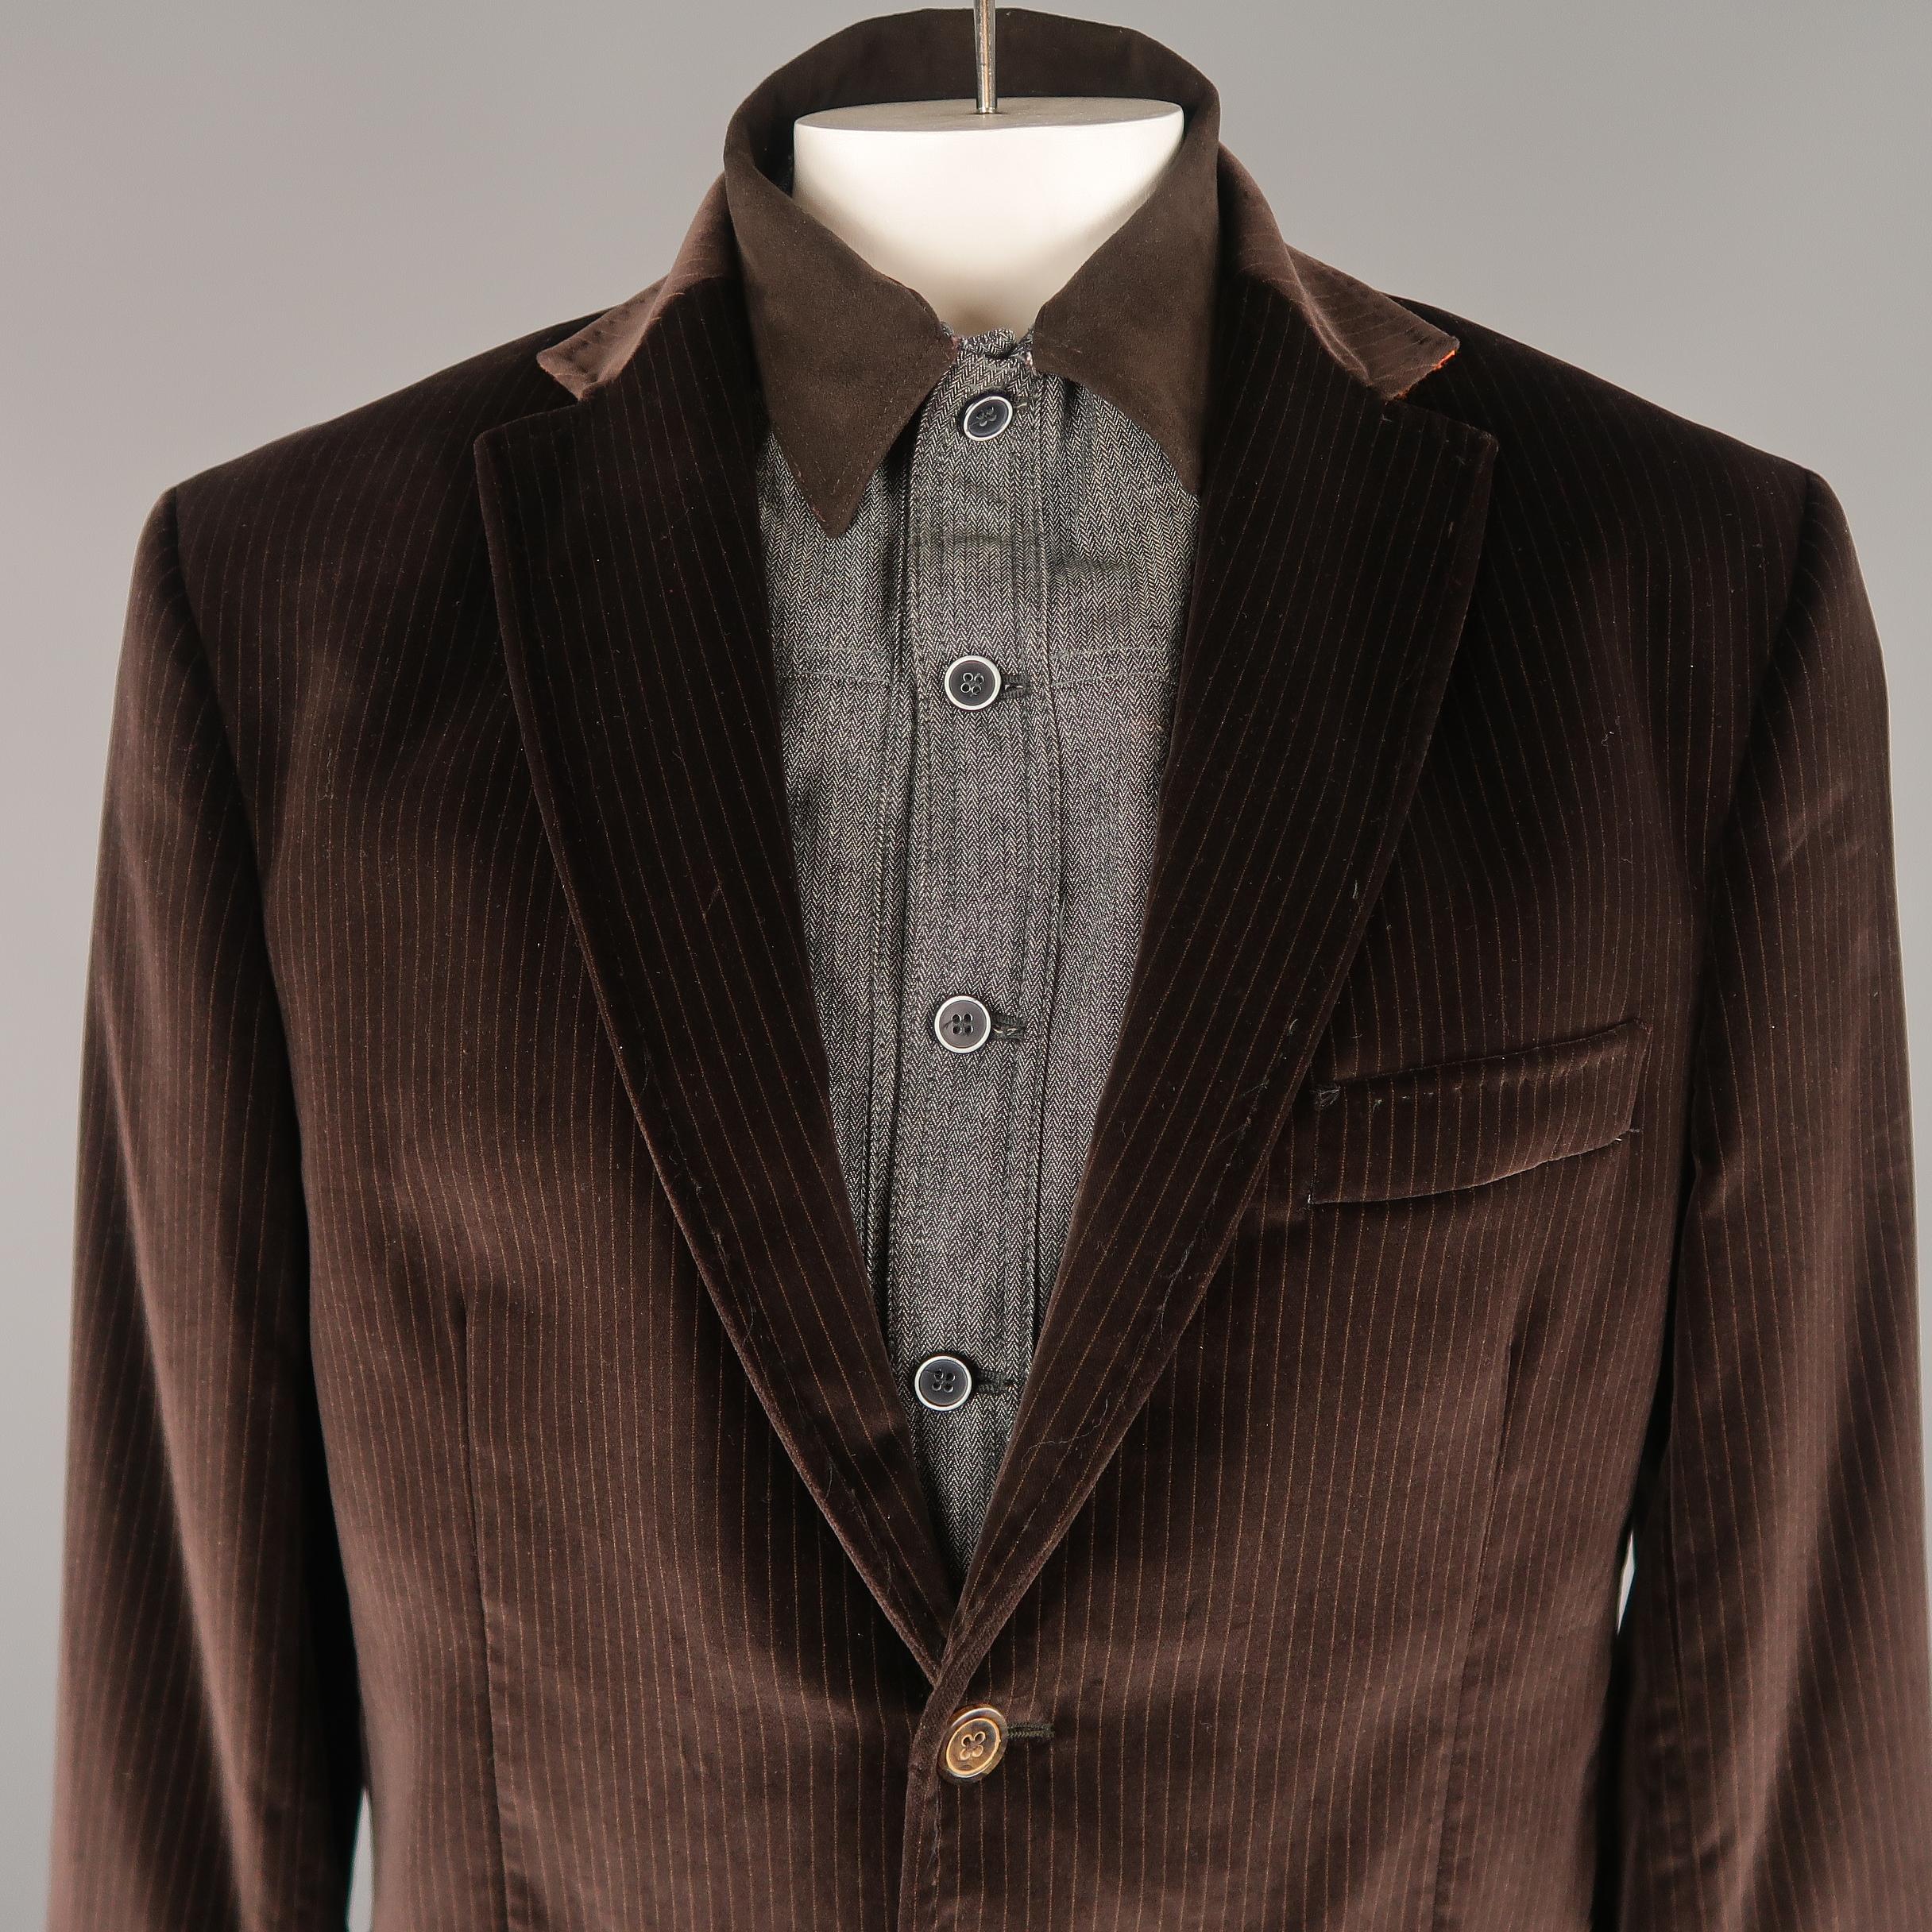 ROBERT GRAHAM Jacket comes in a brown tone in a striped velvet material, with a simulate inner layer, a notch lapel, slit and flap pockets, 2 buttons at closure, single breasted, buttoned cuffs, and a single vent at back. Made in Italy.
 
Excellent